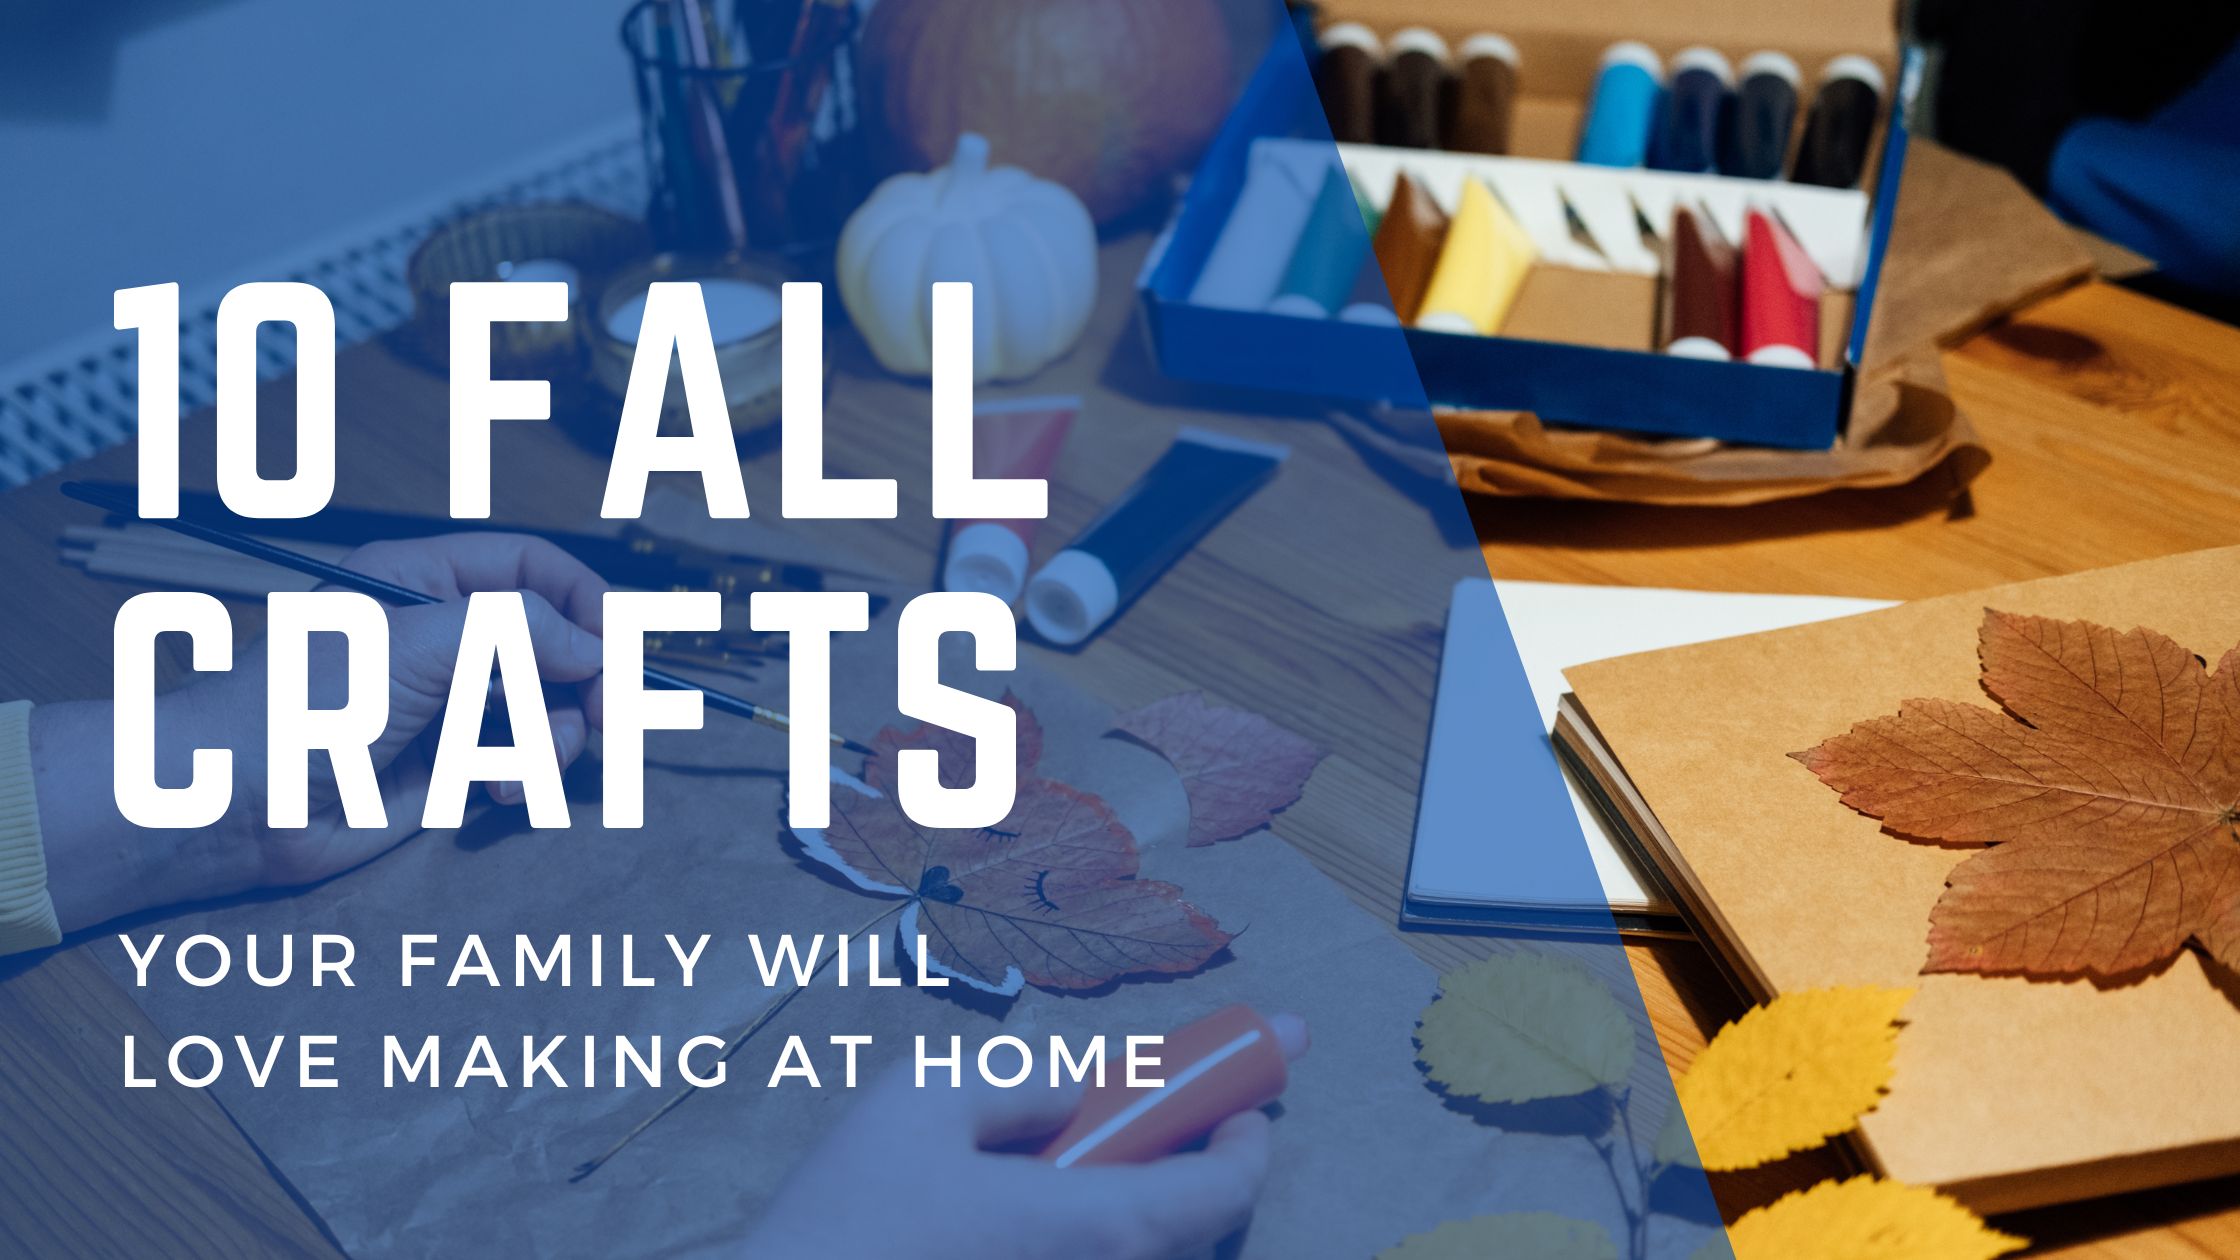 10 Fall Crafts Your Family Will Love Making at Home